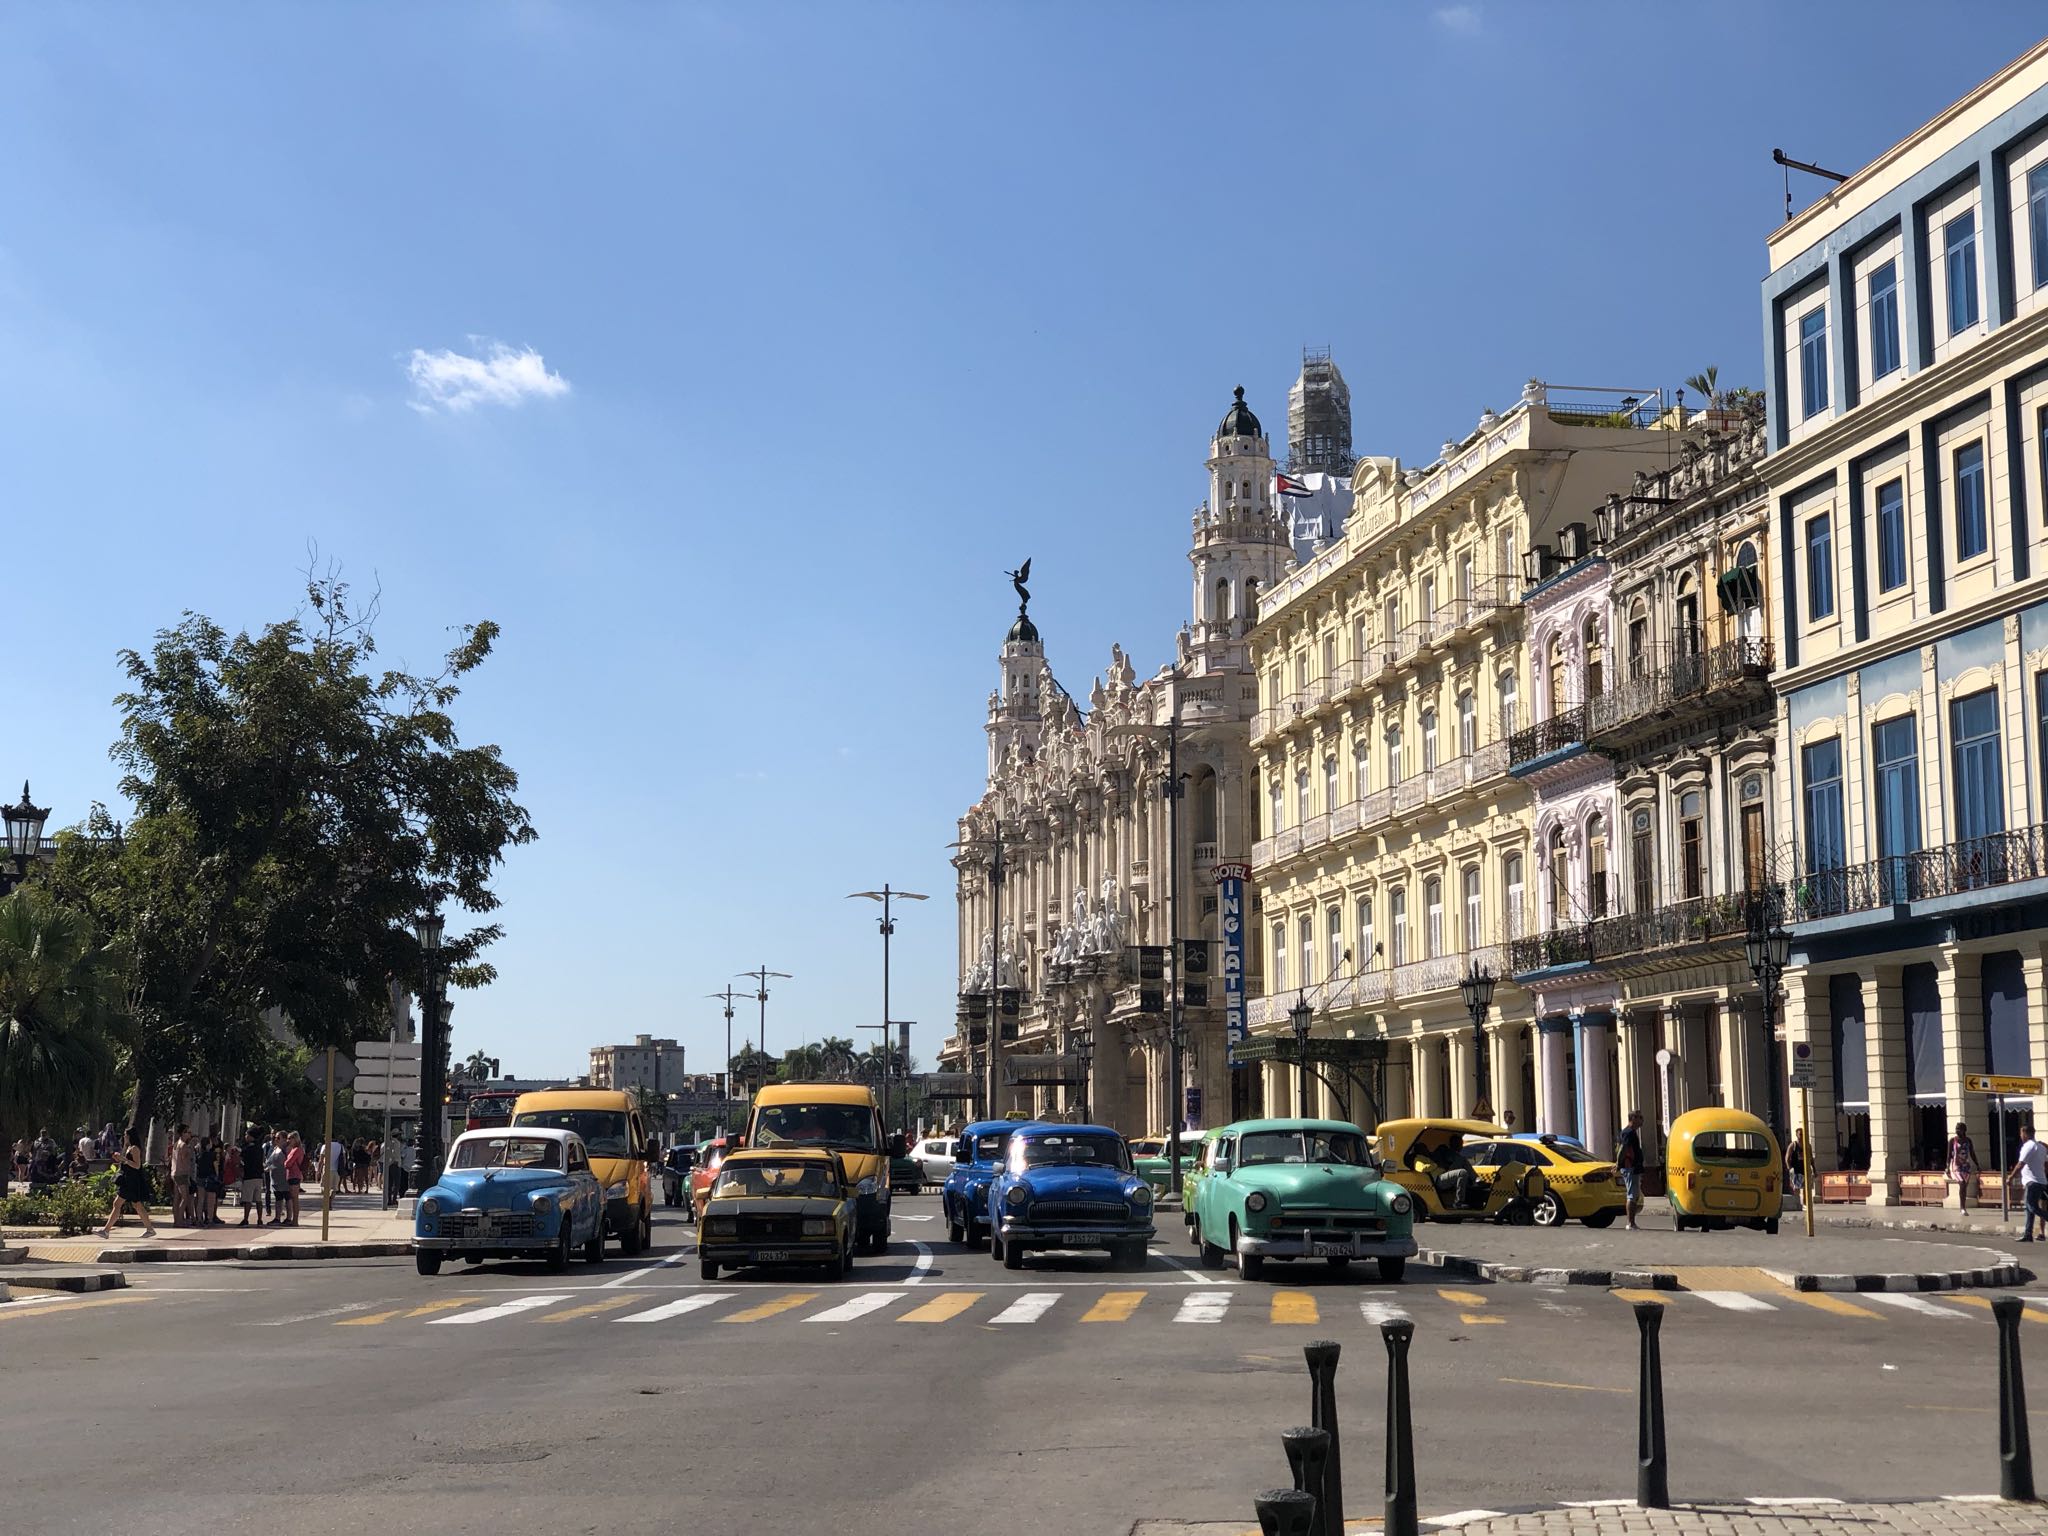 Photo 7 of 221 from the album Highlights Cuba 2019.